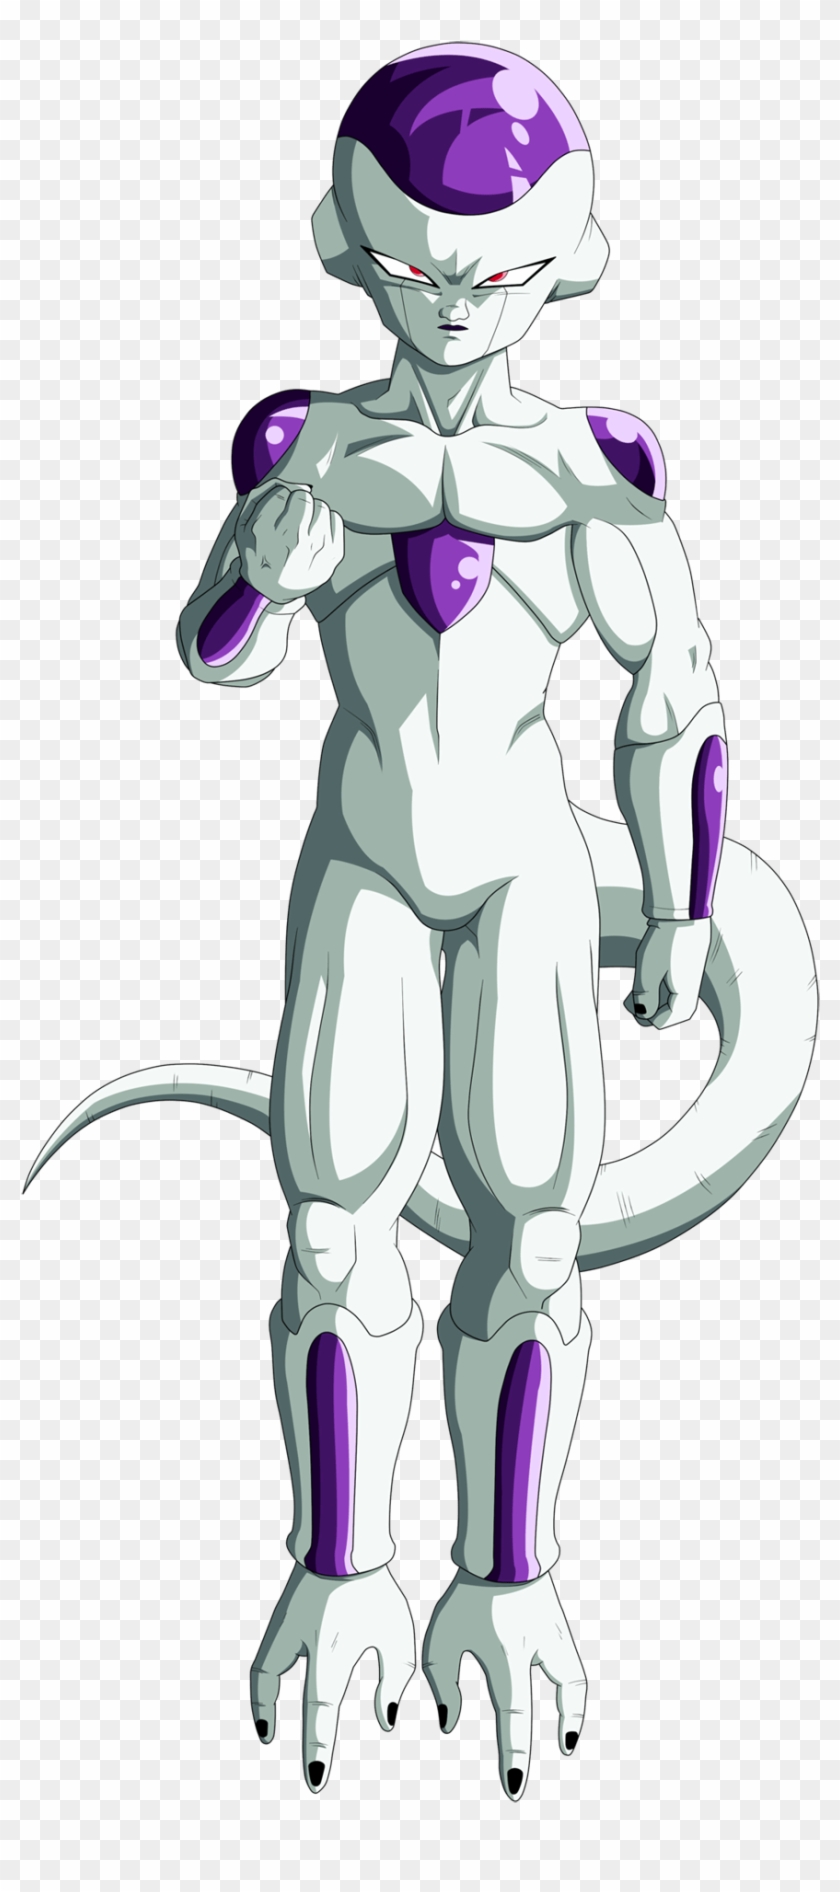 Small, Short, But Very Hard - Dragon Ball Z Frieza Iphone Clipart #678180